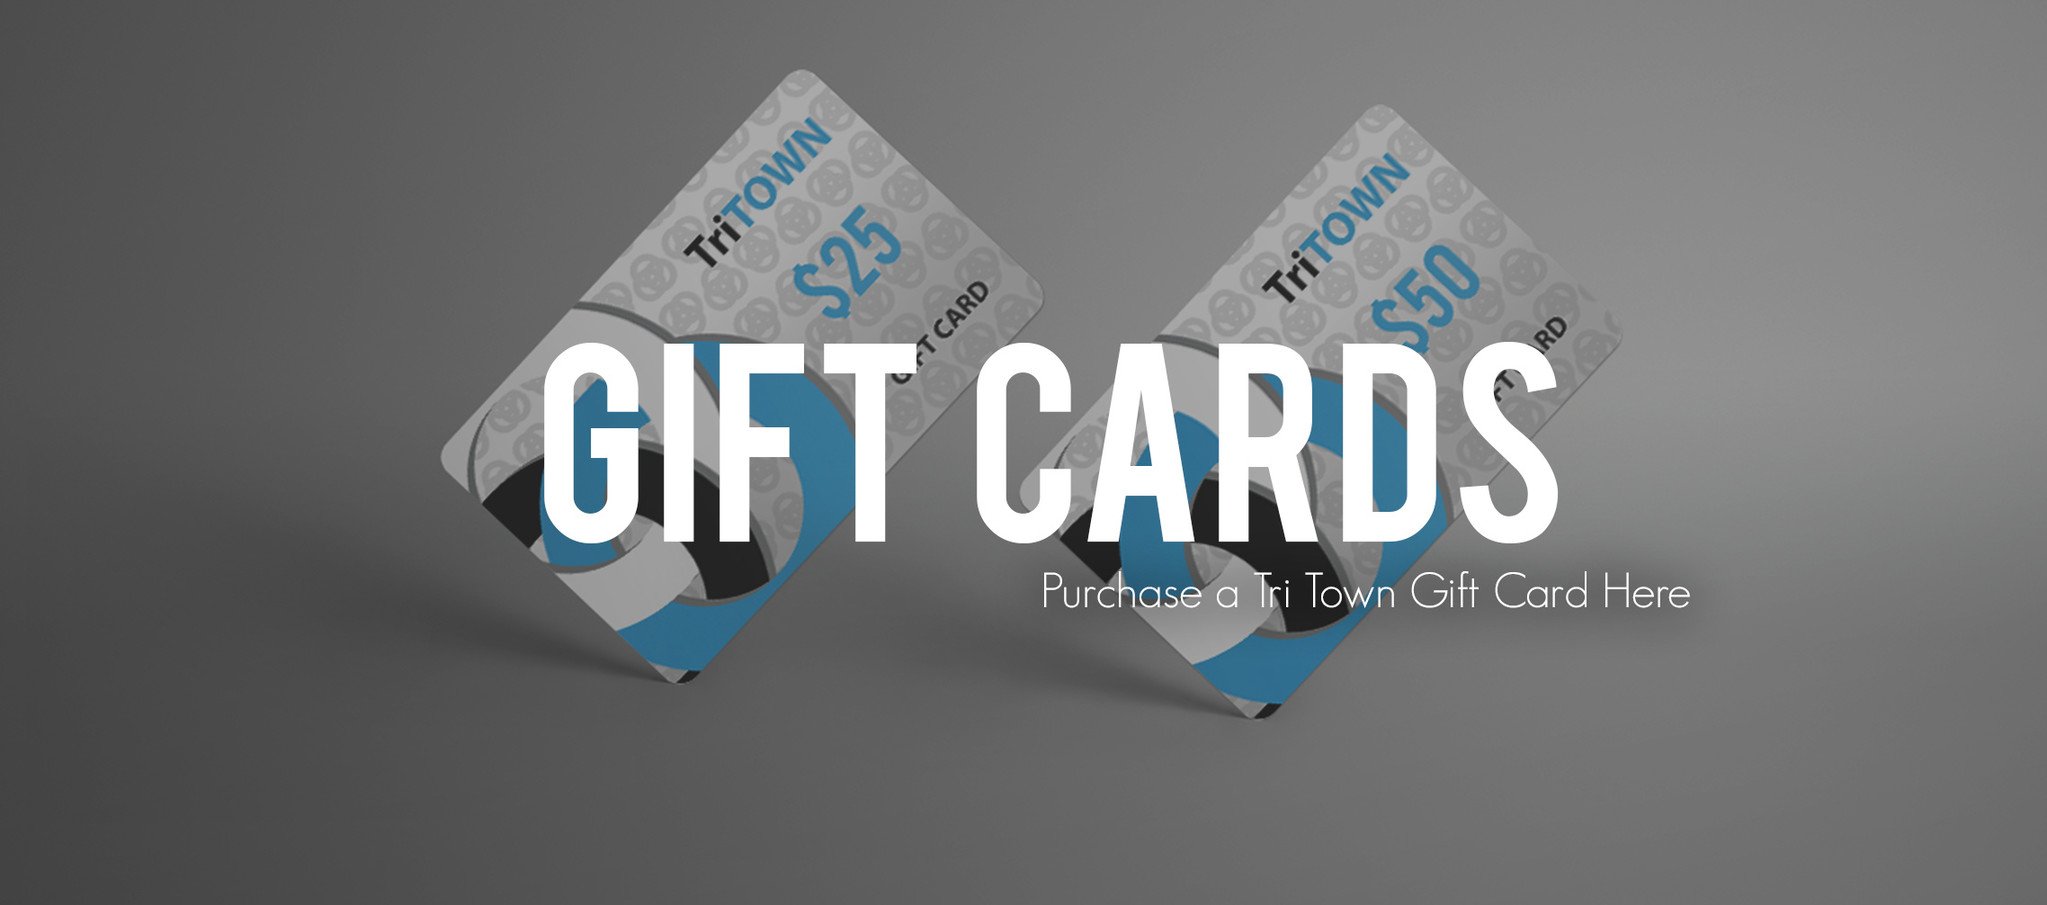 Tri Town Gift Cards for the Holidays